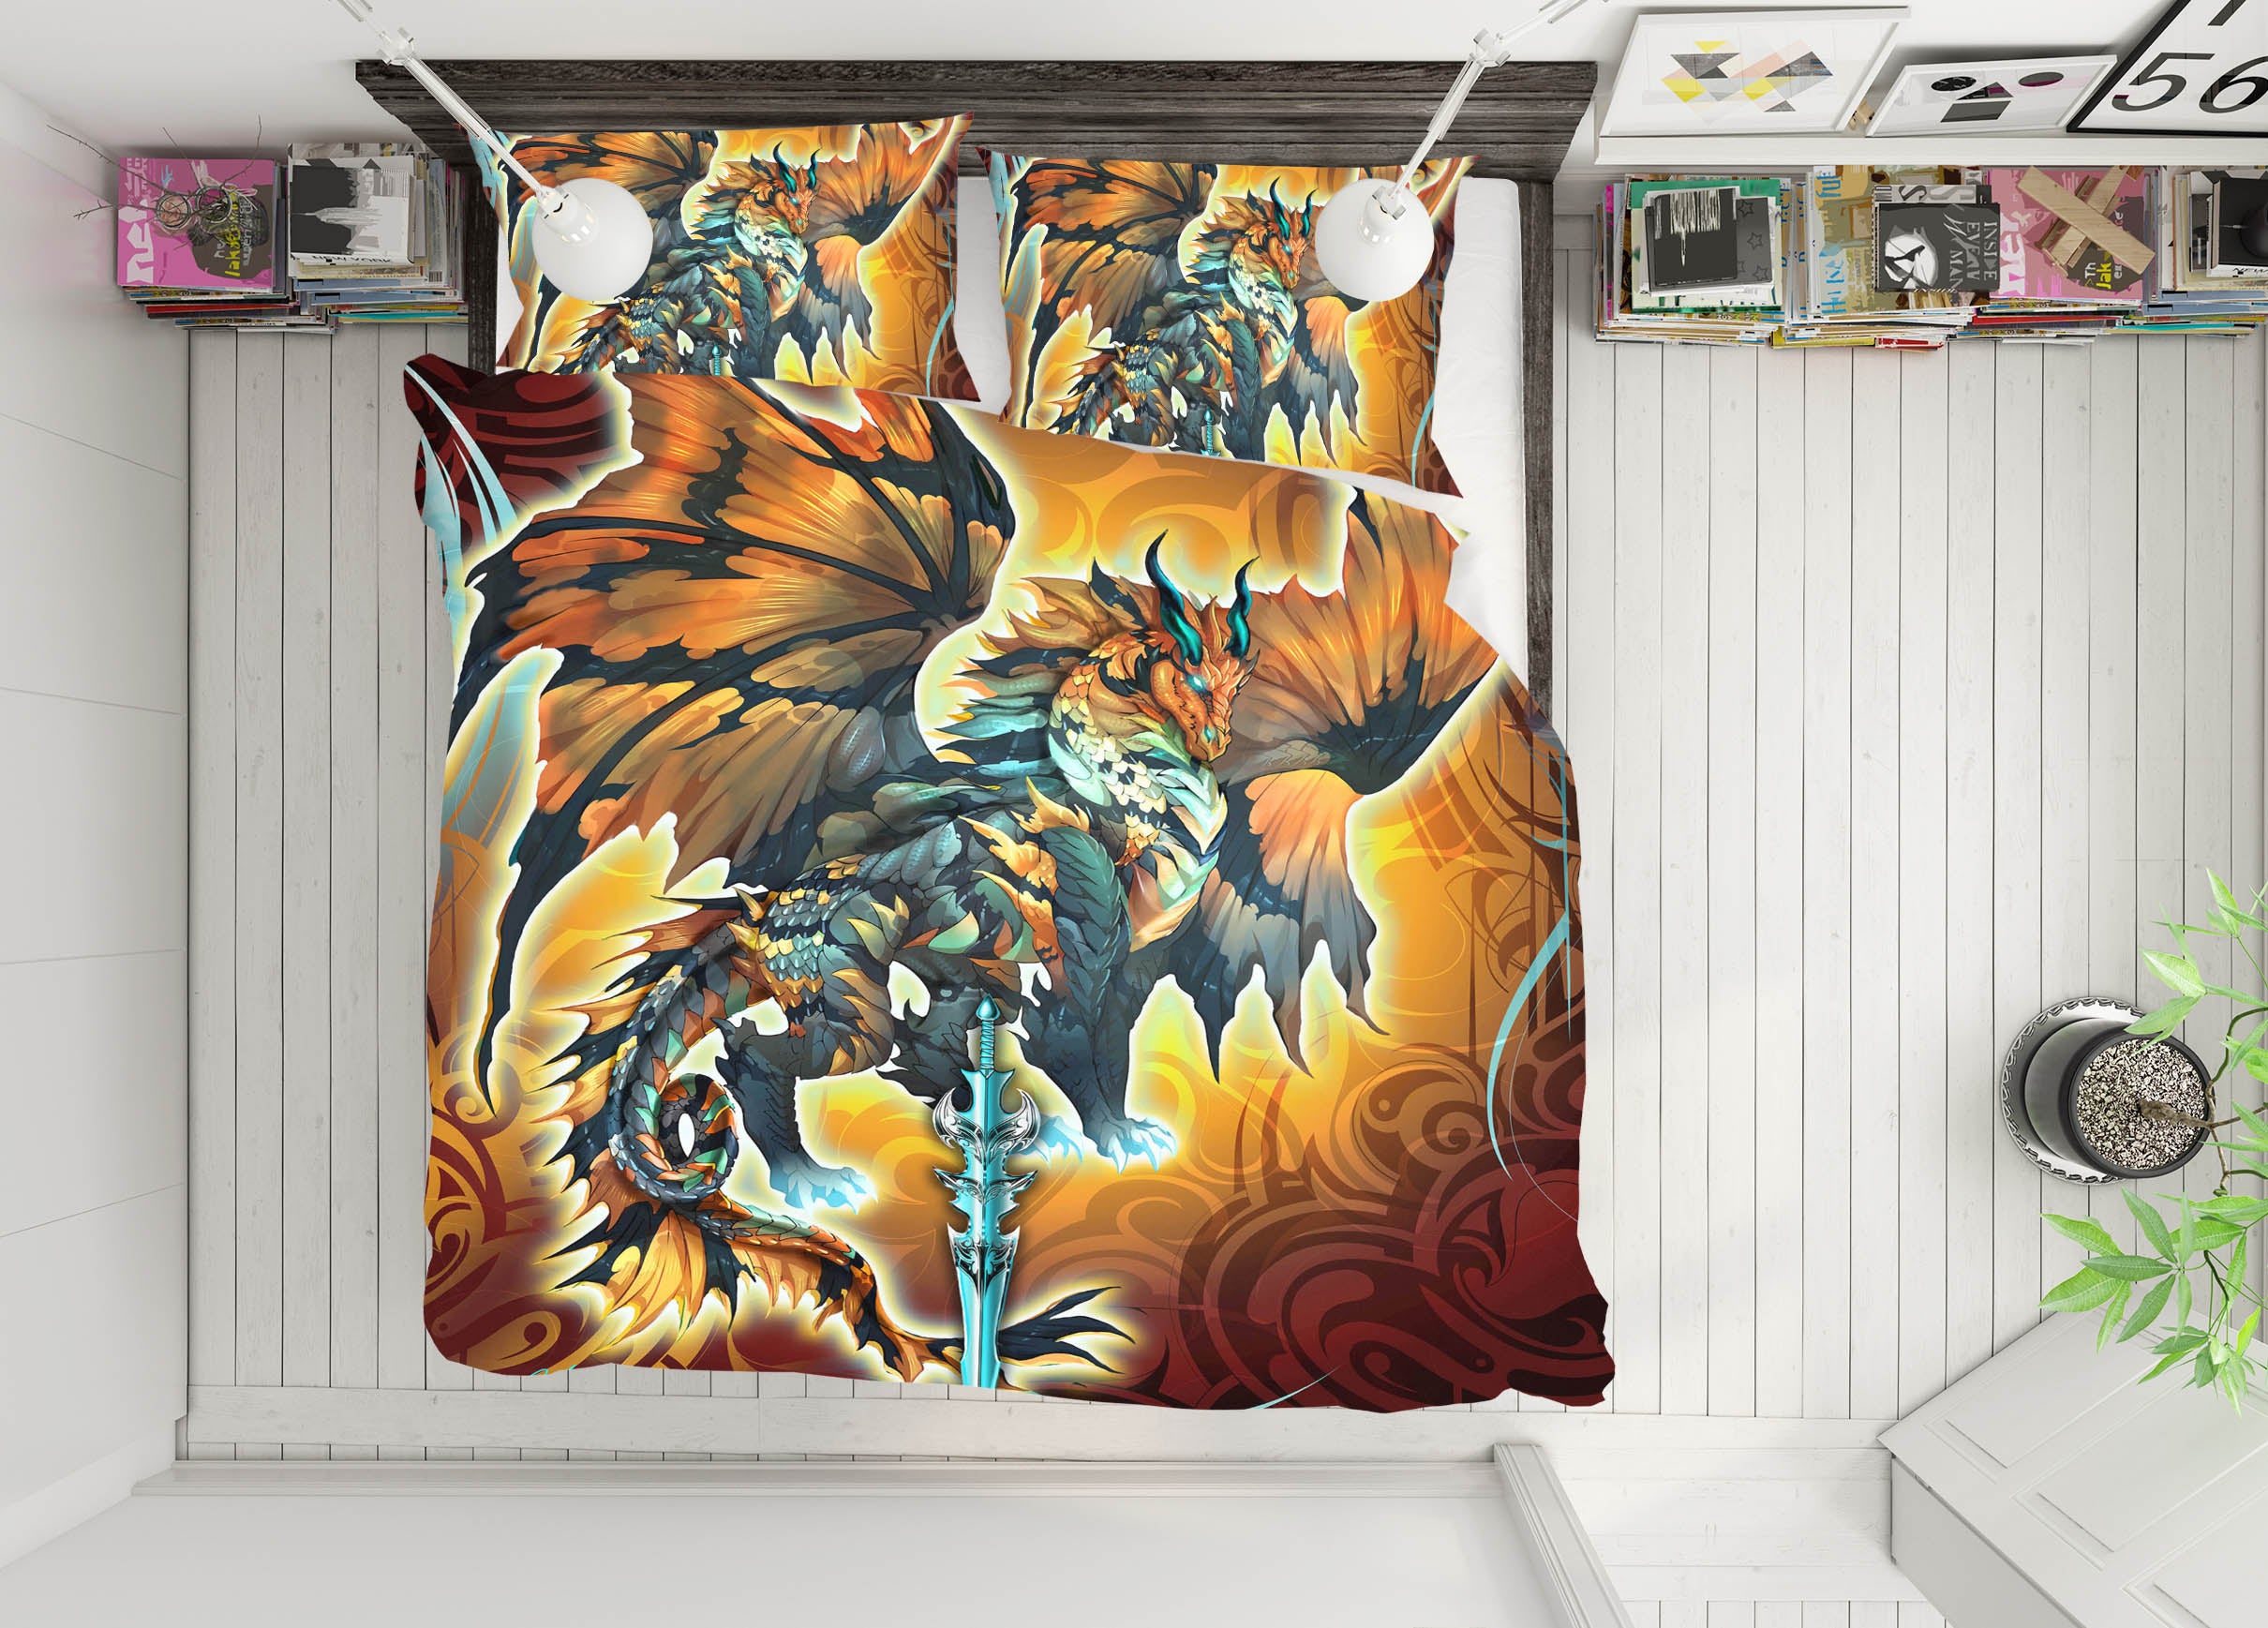 3D Dragon Wings 8320 Ruth Thompson Bedding Bed Pillowcases Quilt Cover Duvet Cover